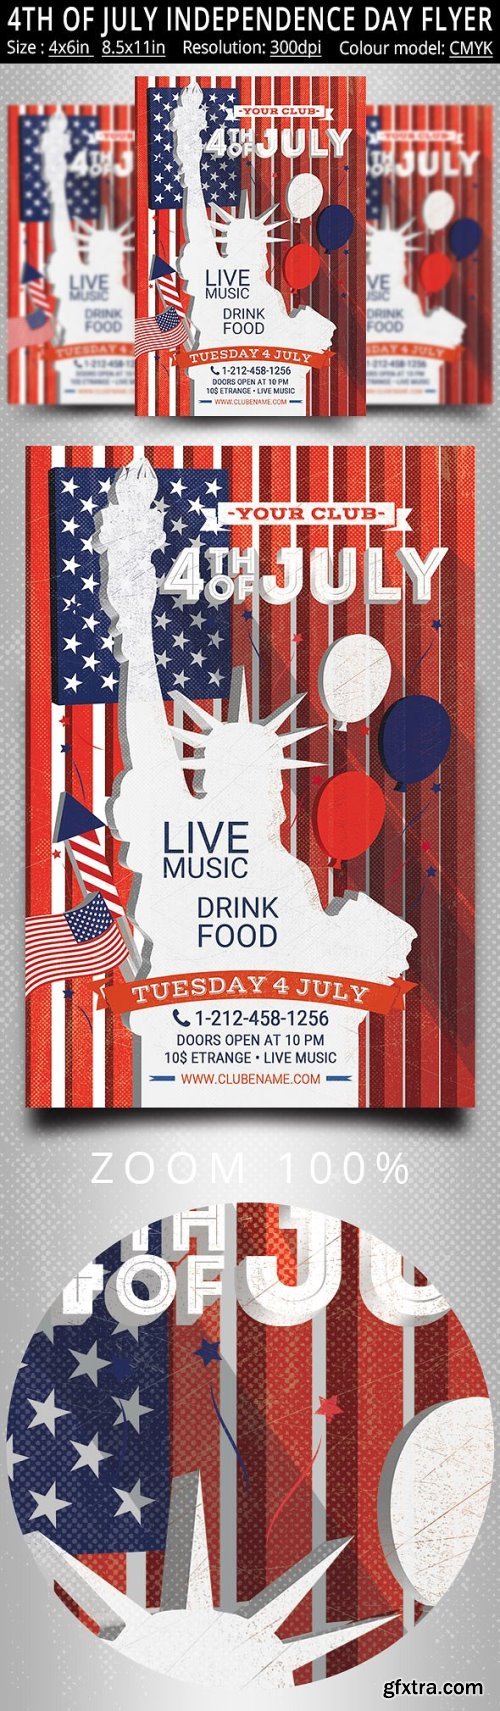 CM - 4th of July Independence Day Flyer 1580595